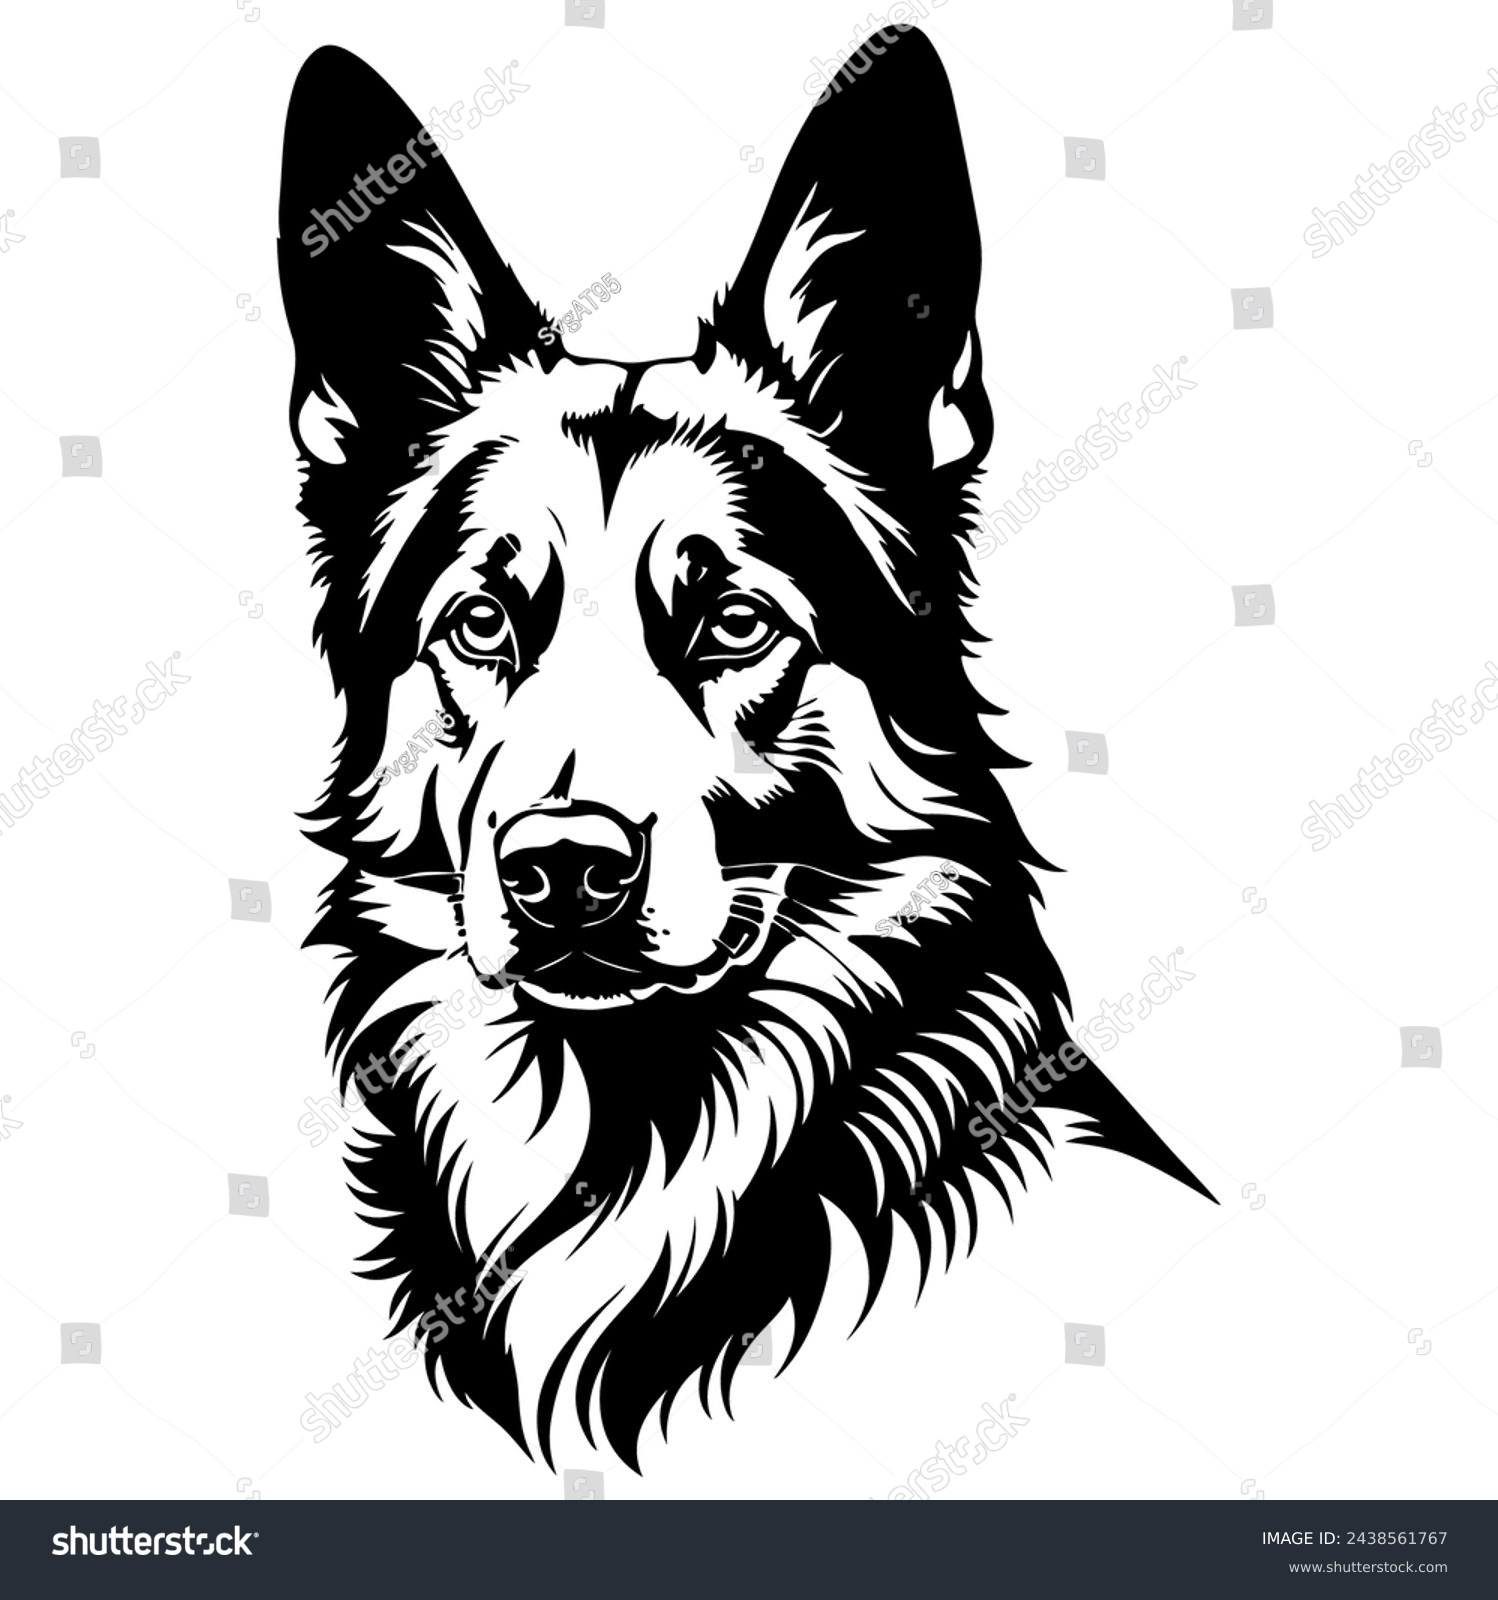 SVG of Portrait of a German Shepherd Dog Vector isolated on white background, Dog Silhouettes. svg